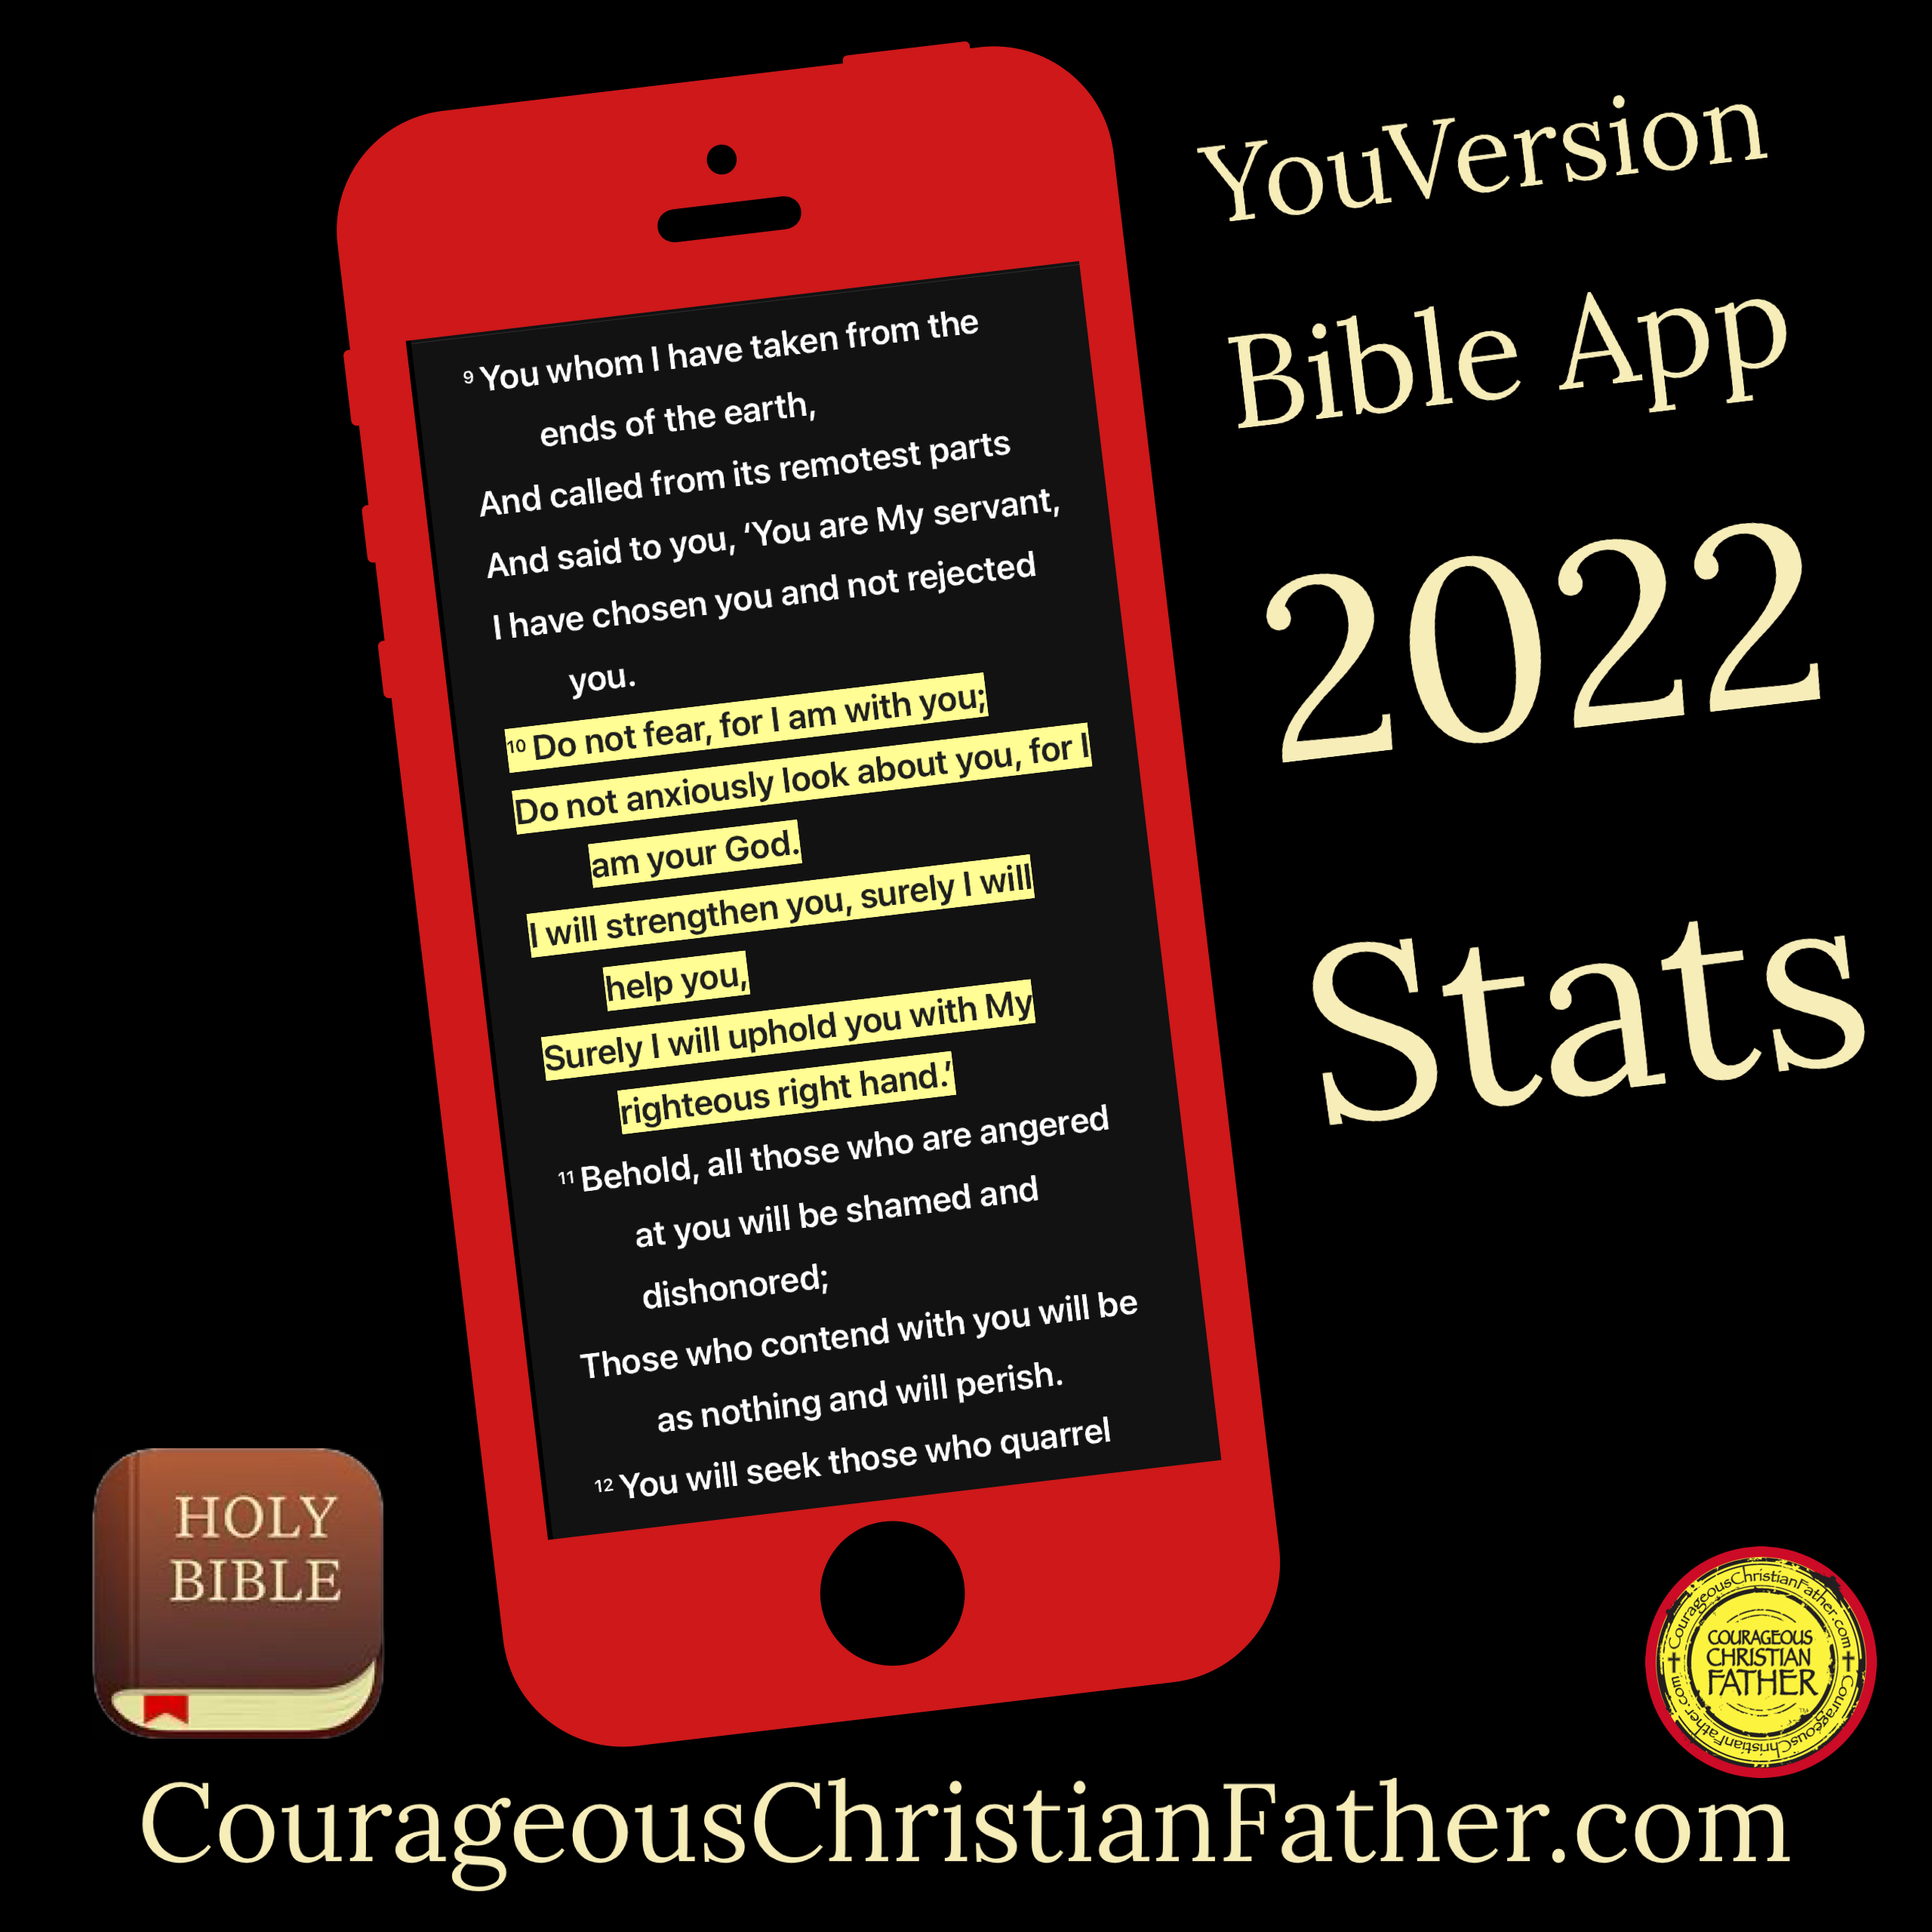 YouVersion Bible App 2022 Stats - Each year, YouVersion dives into the top data trends to highlight how God is moving through the app, and for 2022, Ukraine is one of the Bible app’s most interesting Bible engagement stories. As Ukrainian people fled the war and relocated to different European countries, YouVersion saw Ukrainian-language Bible engagement skyrocket in several of those countries, many by triple digits. #YouVersion #BibleApp